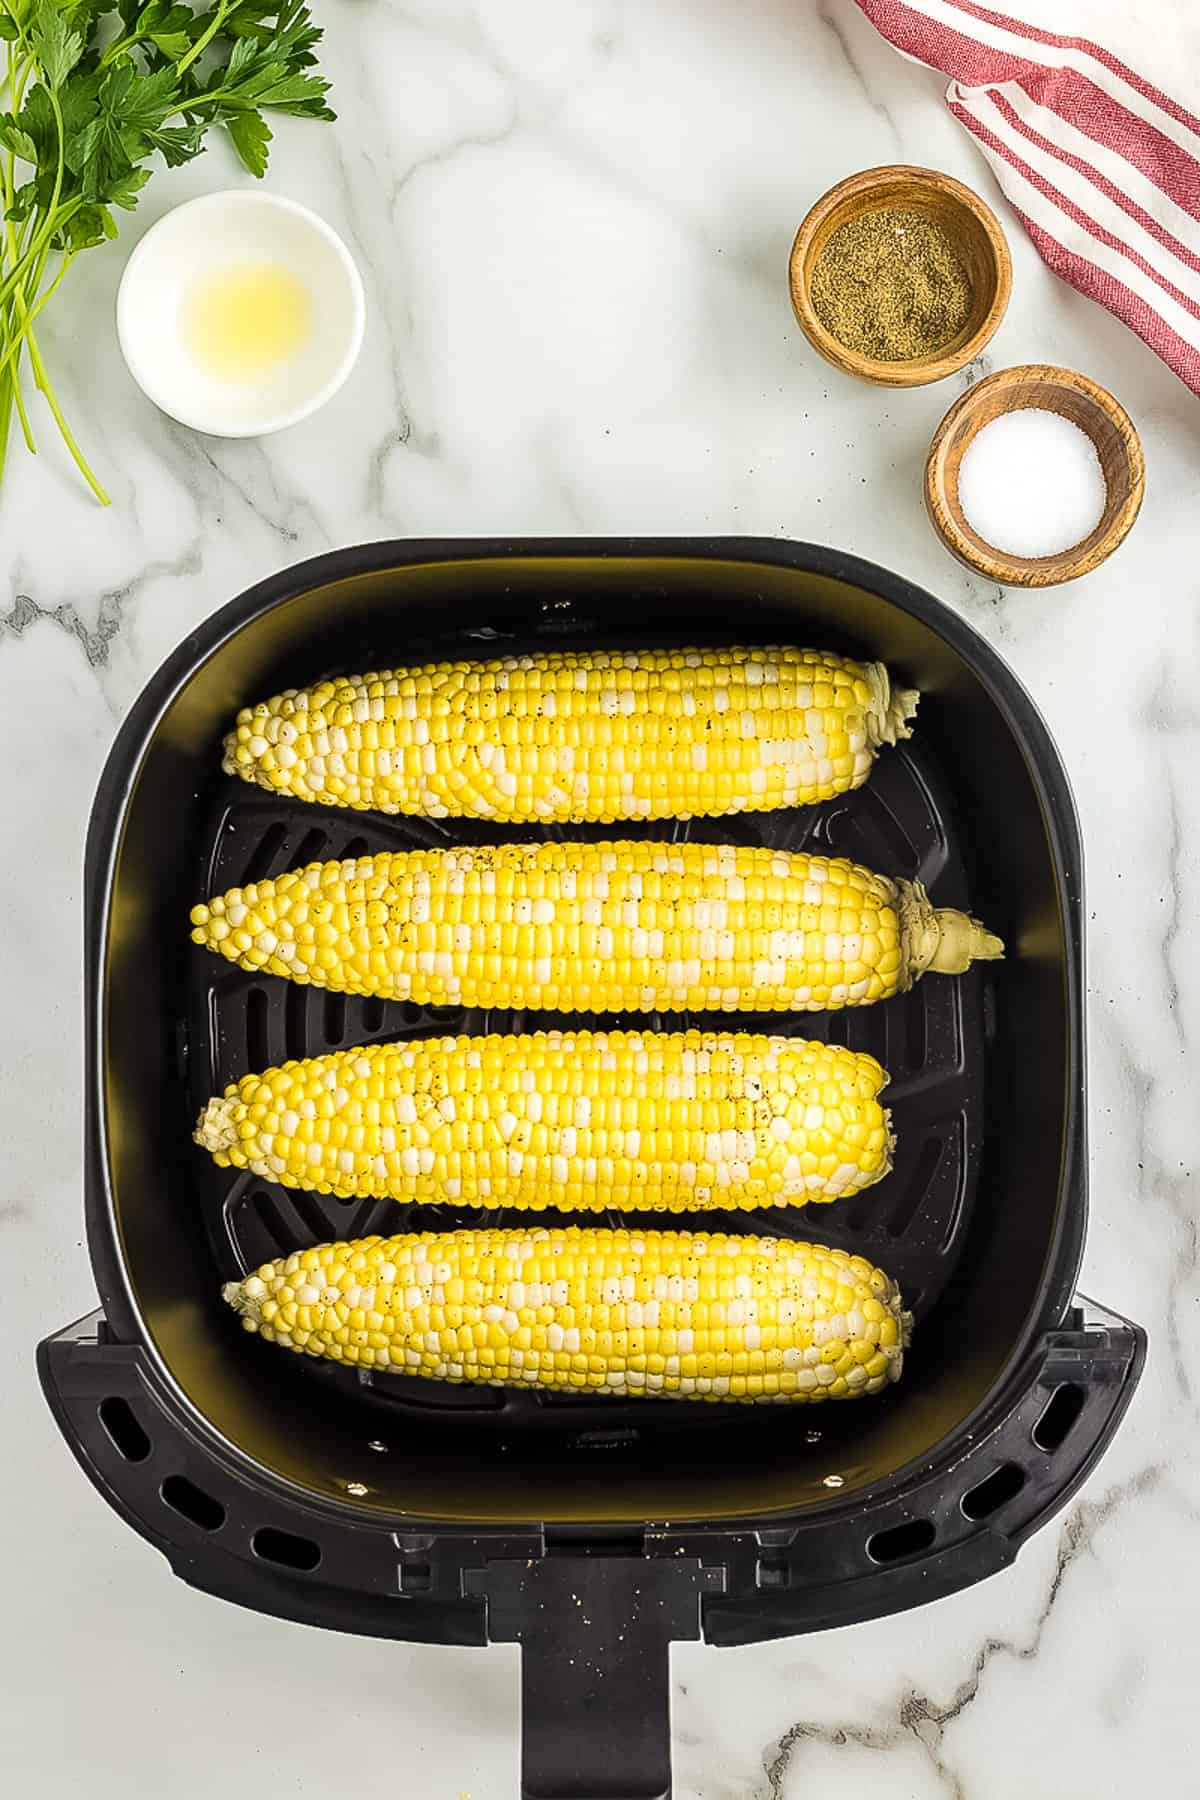 Four pieces of corn in air fryer basket